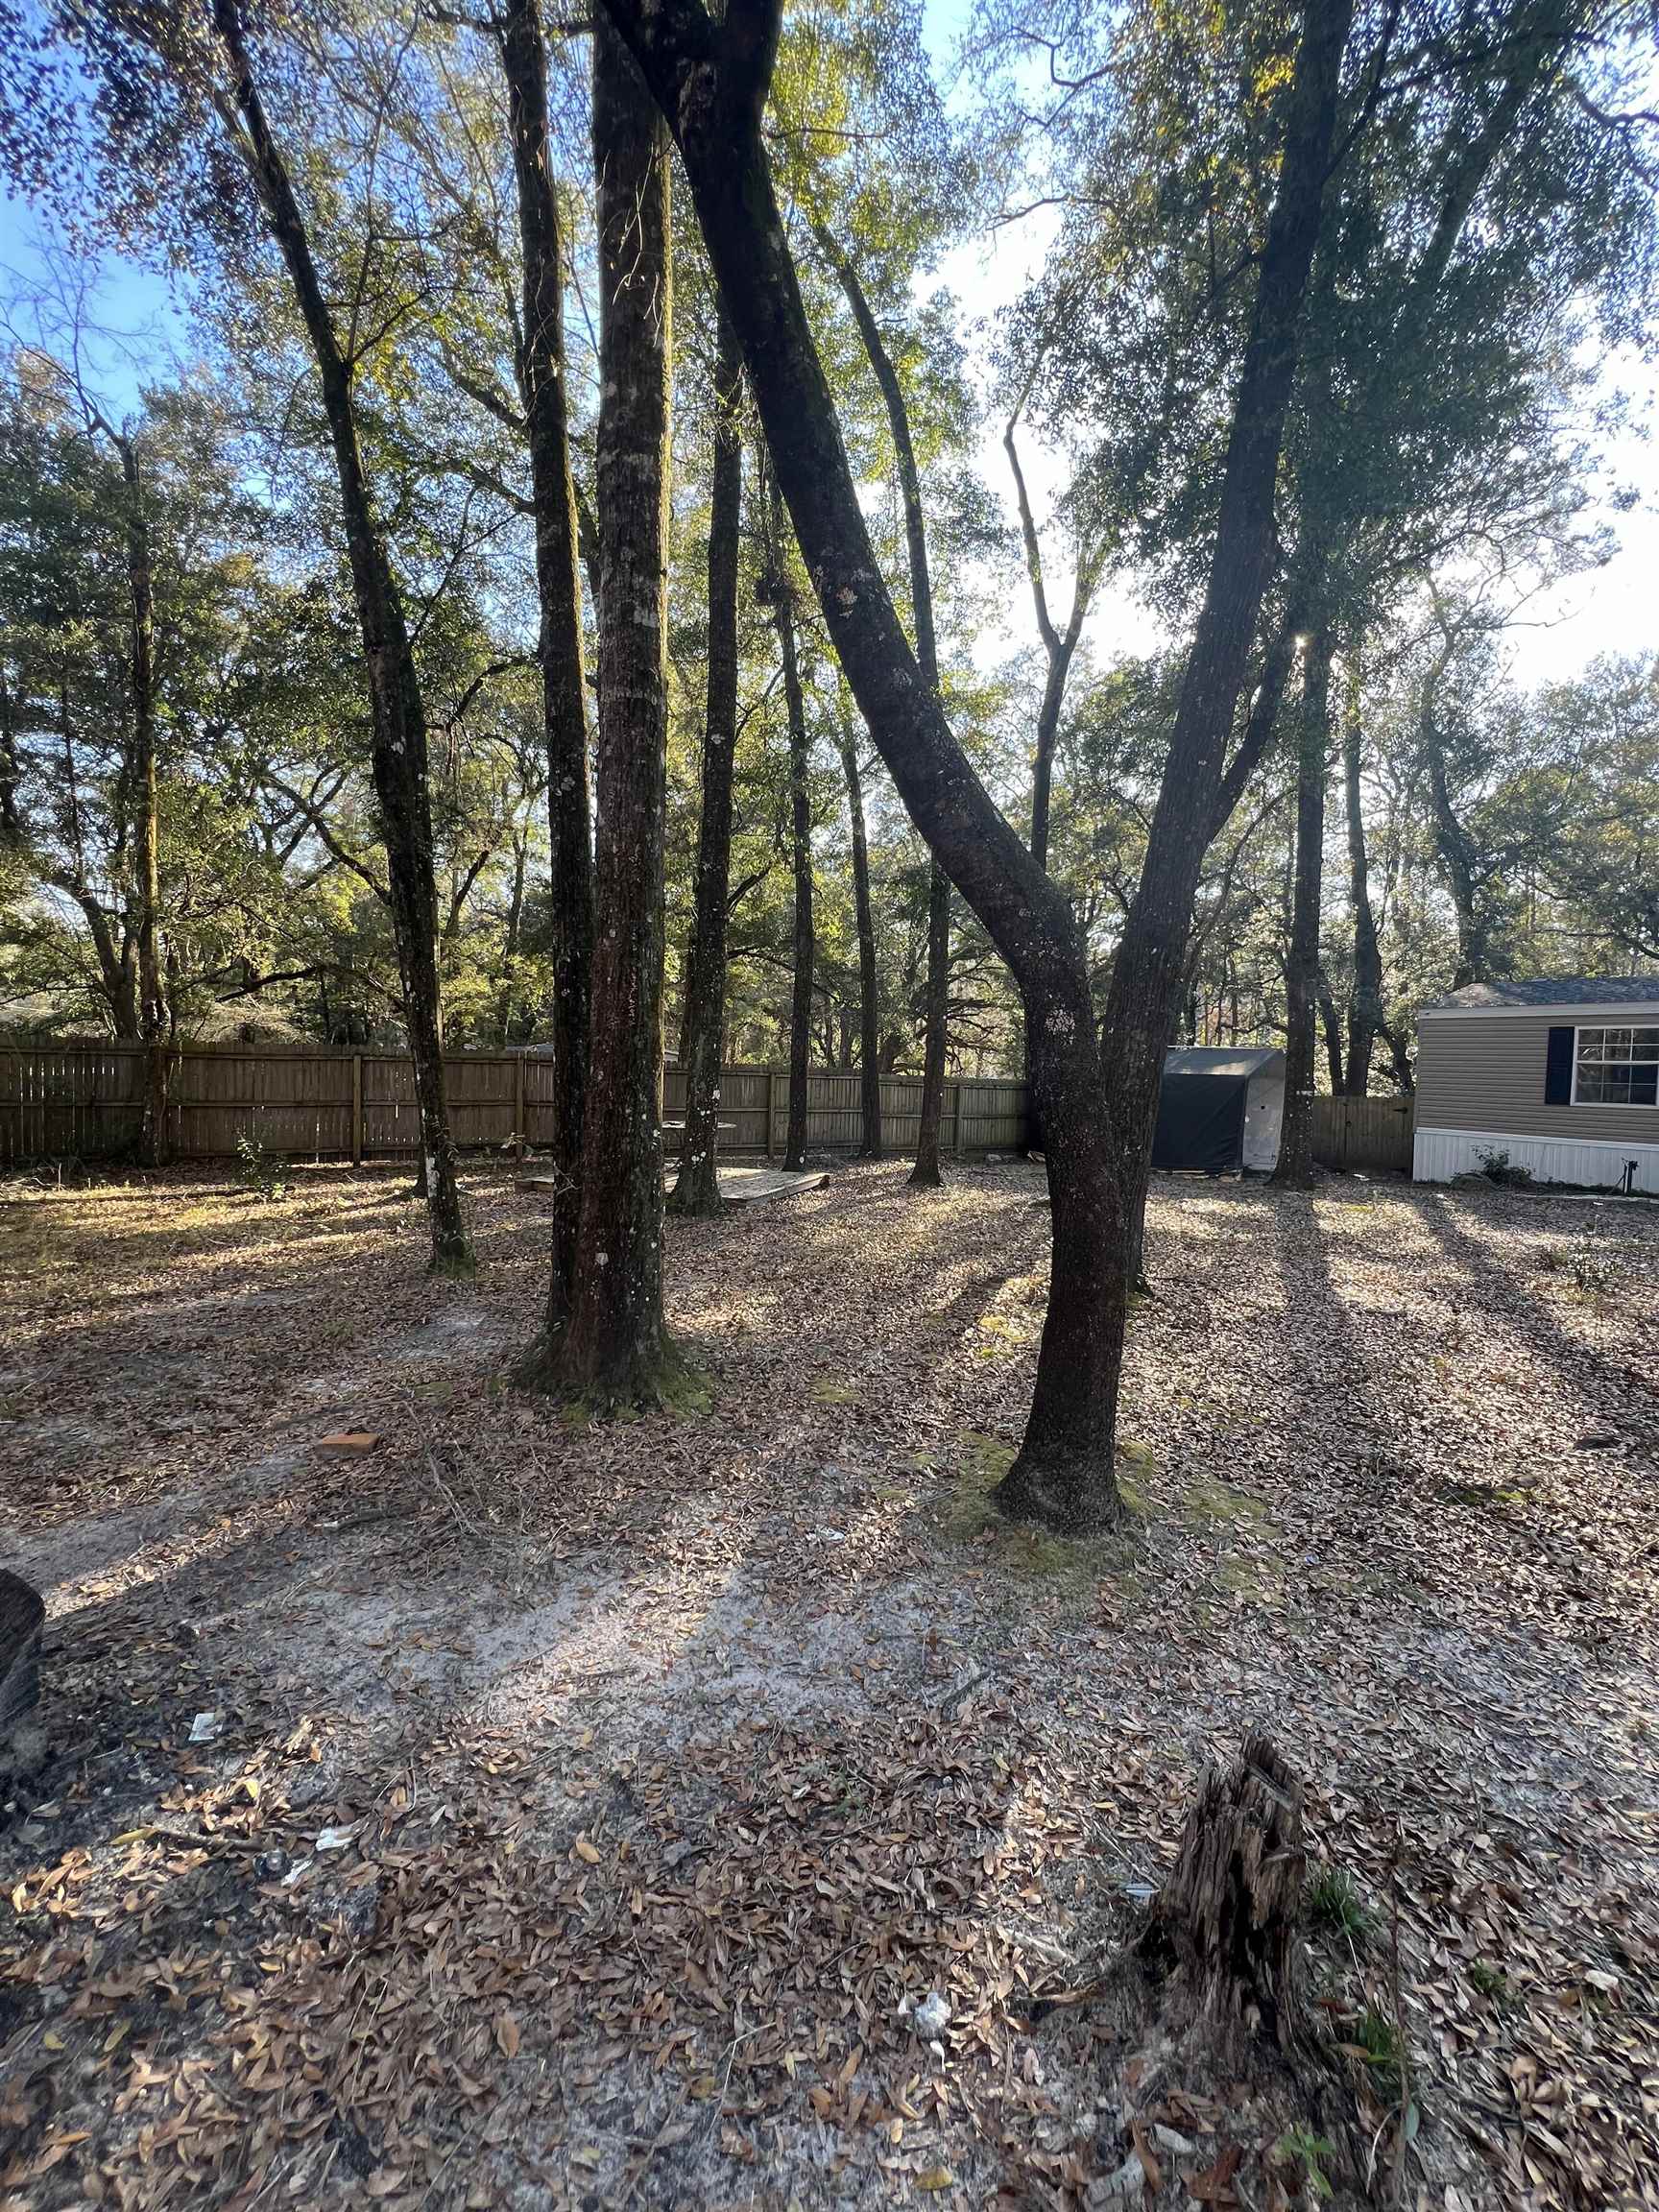 4282 W Bark Drive,TALLAHASSEE,Florida 32305,2 Bedrooms Bedrooms,2 BathroomsBathrooms,Manuf/mobile home,4282 W Bark Drive,368815